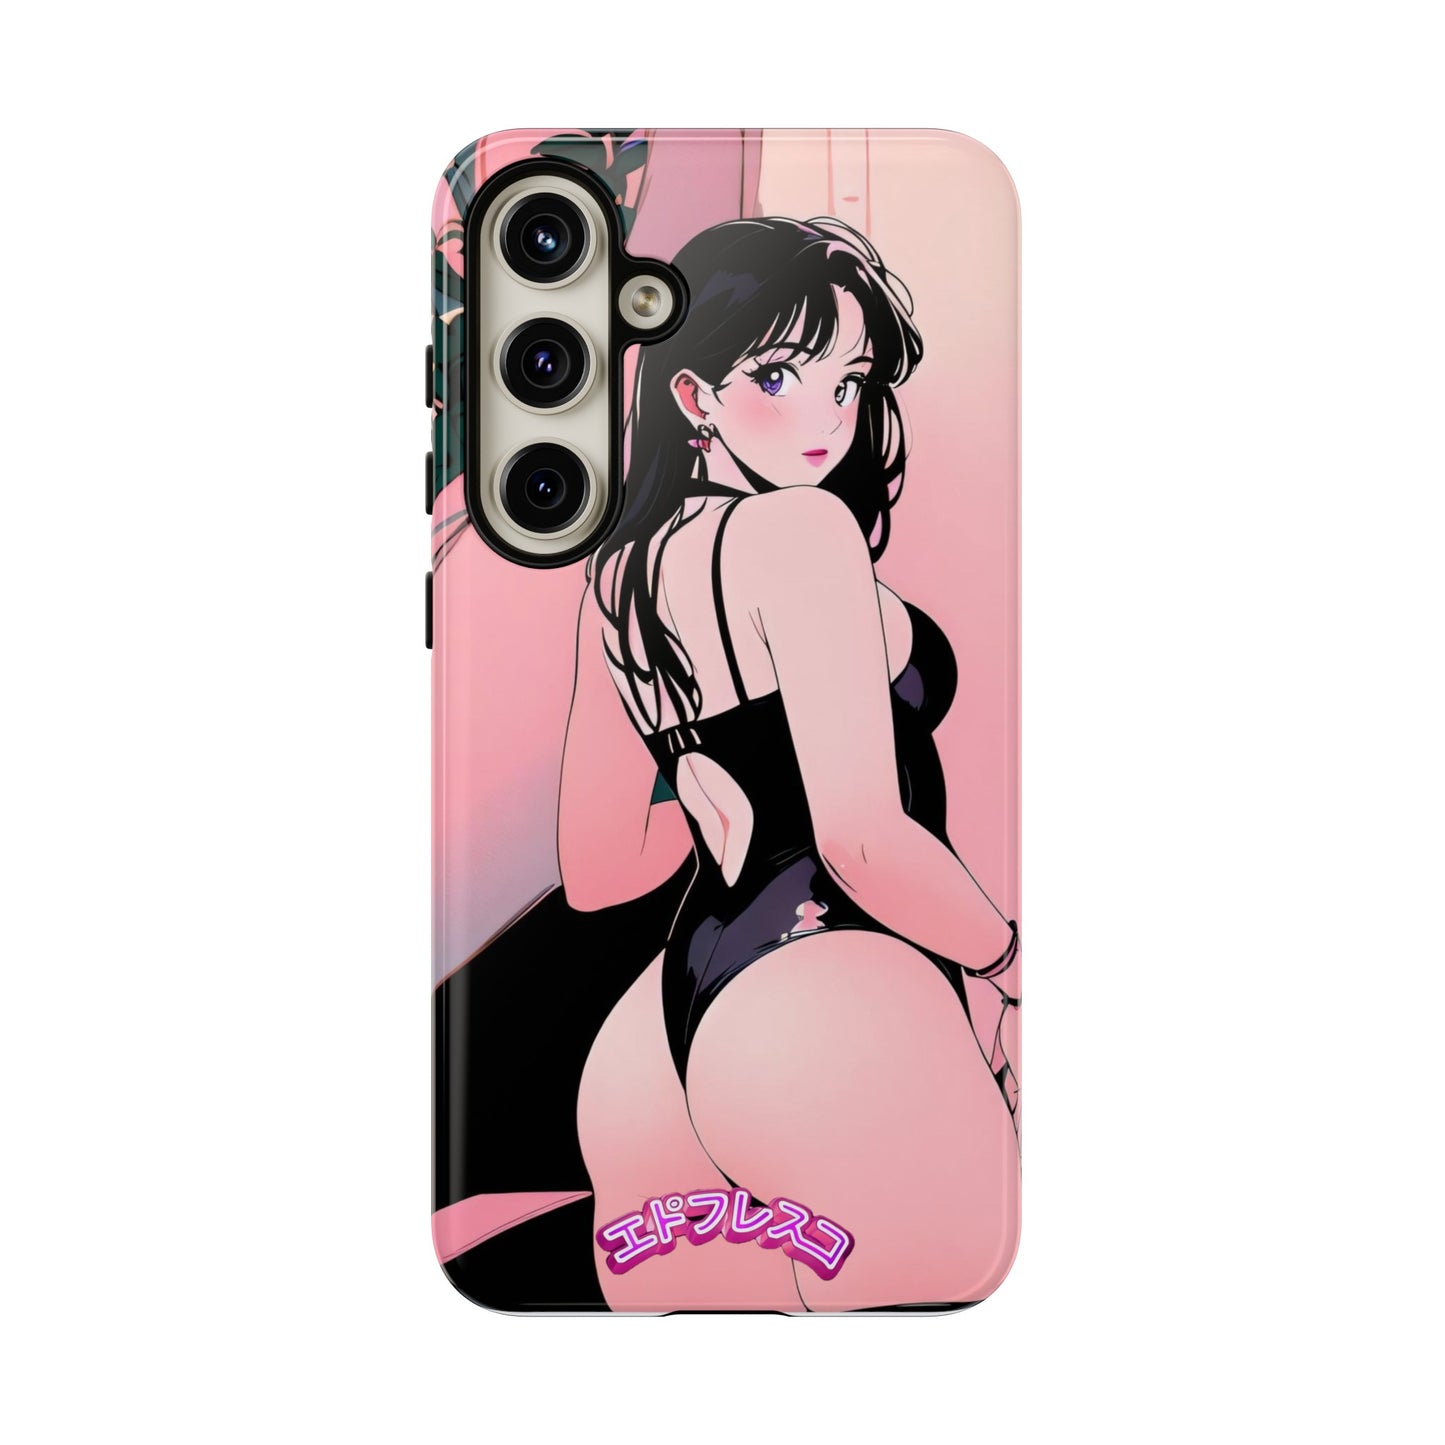 Anime Style Art Tough Cases- "Pink Party"